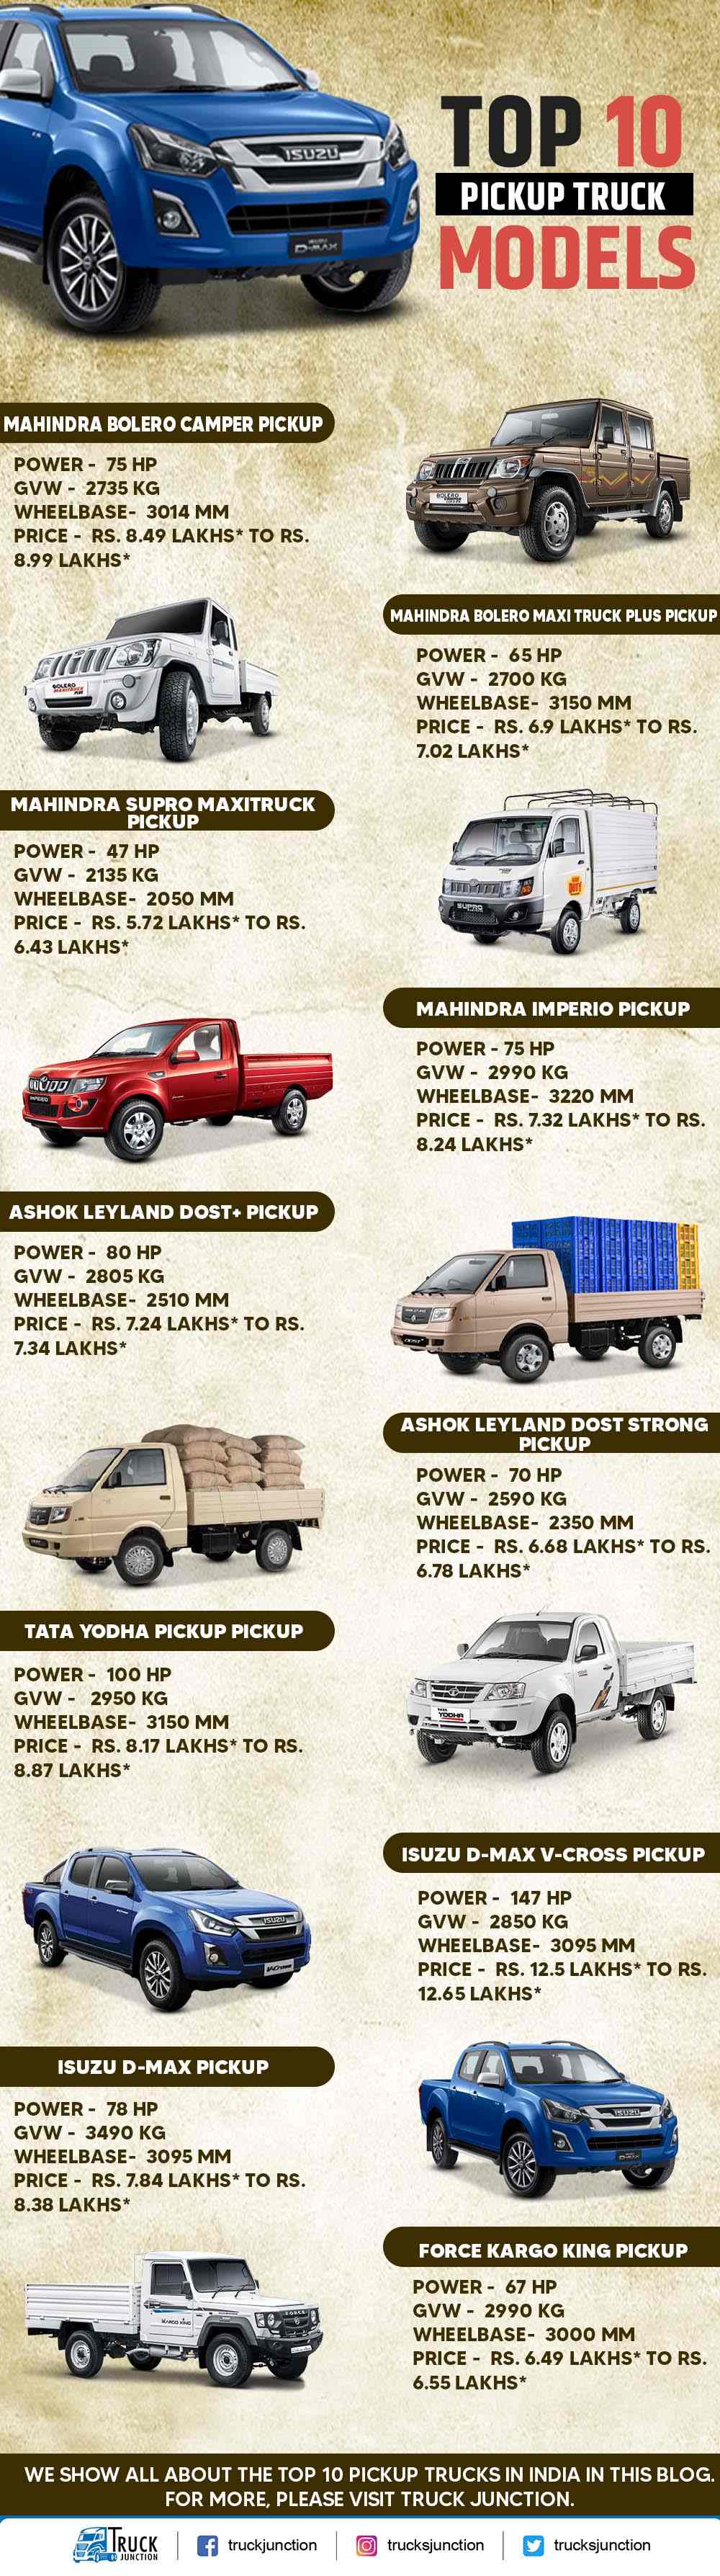 Top 10 Pickup Models Infographic